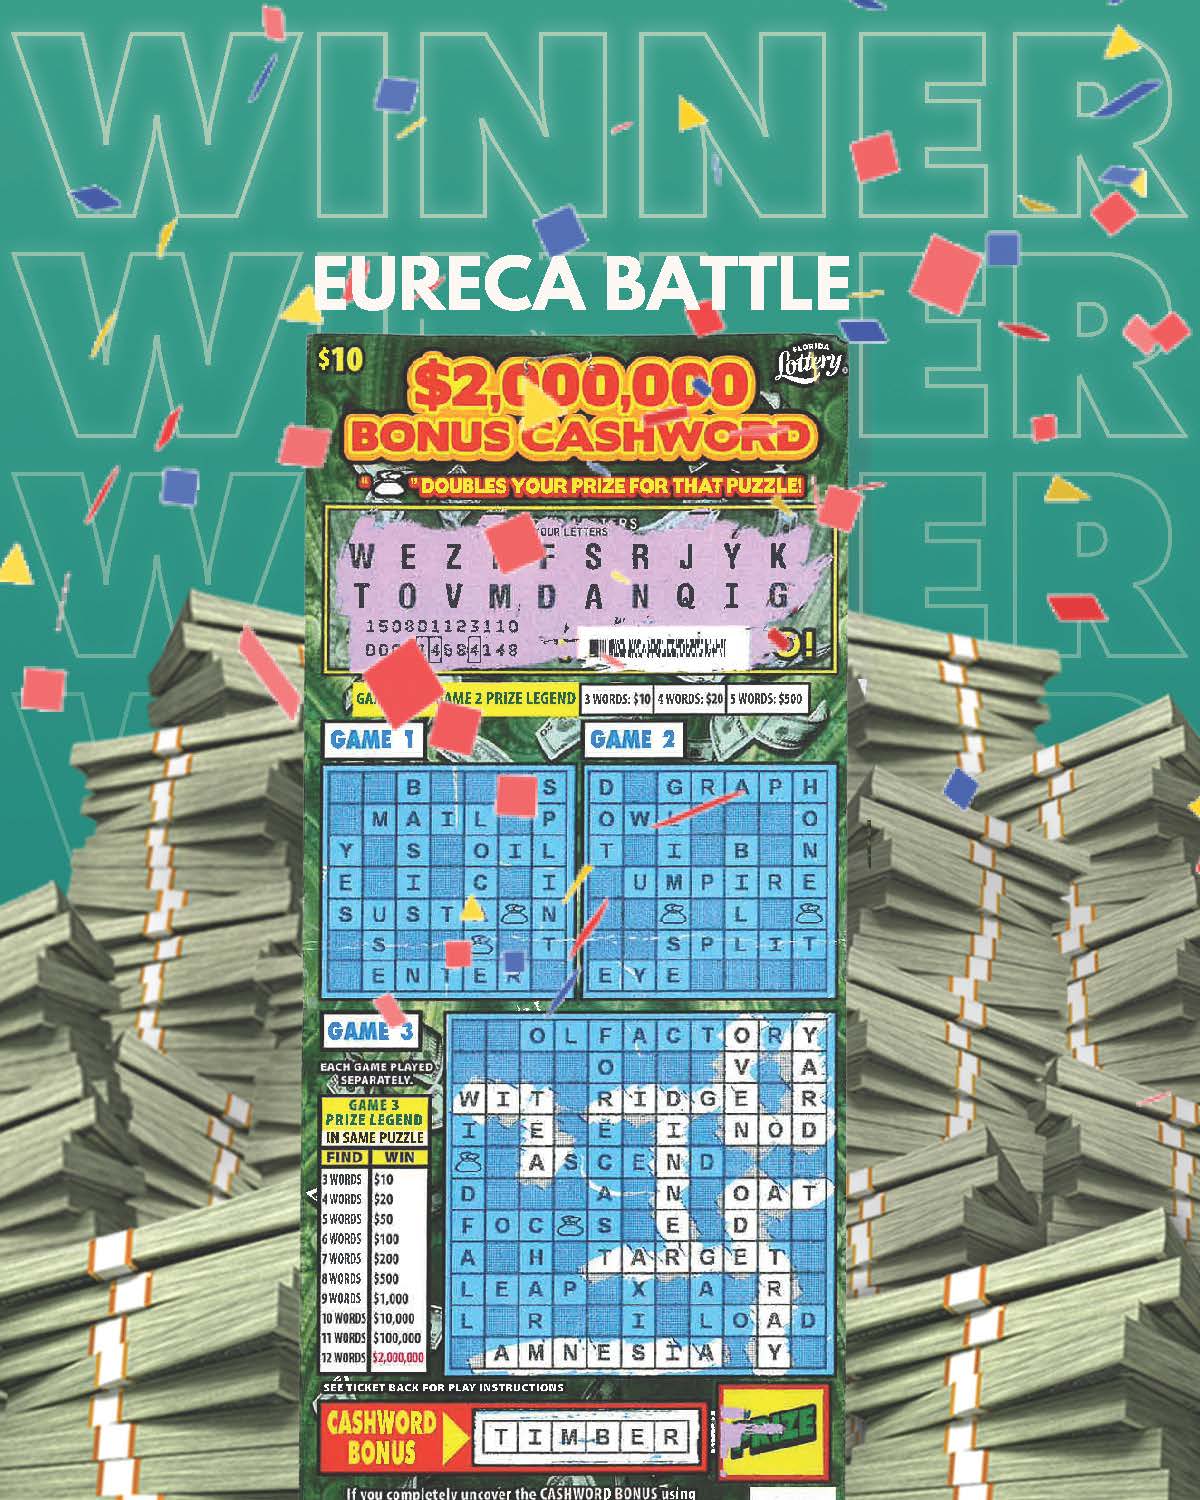 Volusia woman wins top prize in Florida Lottery scratch-off game